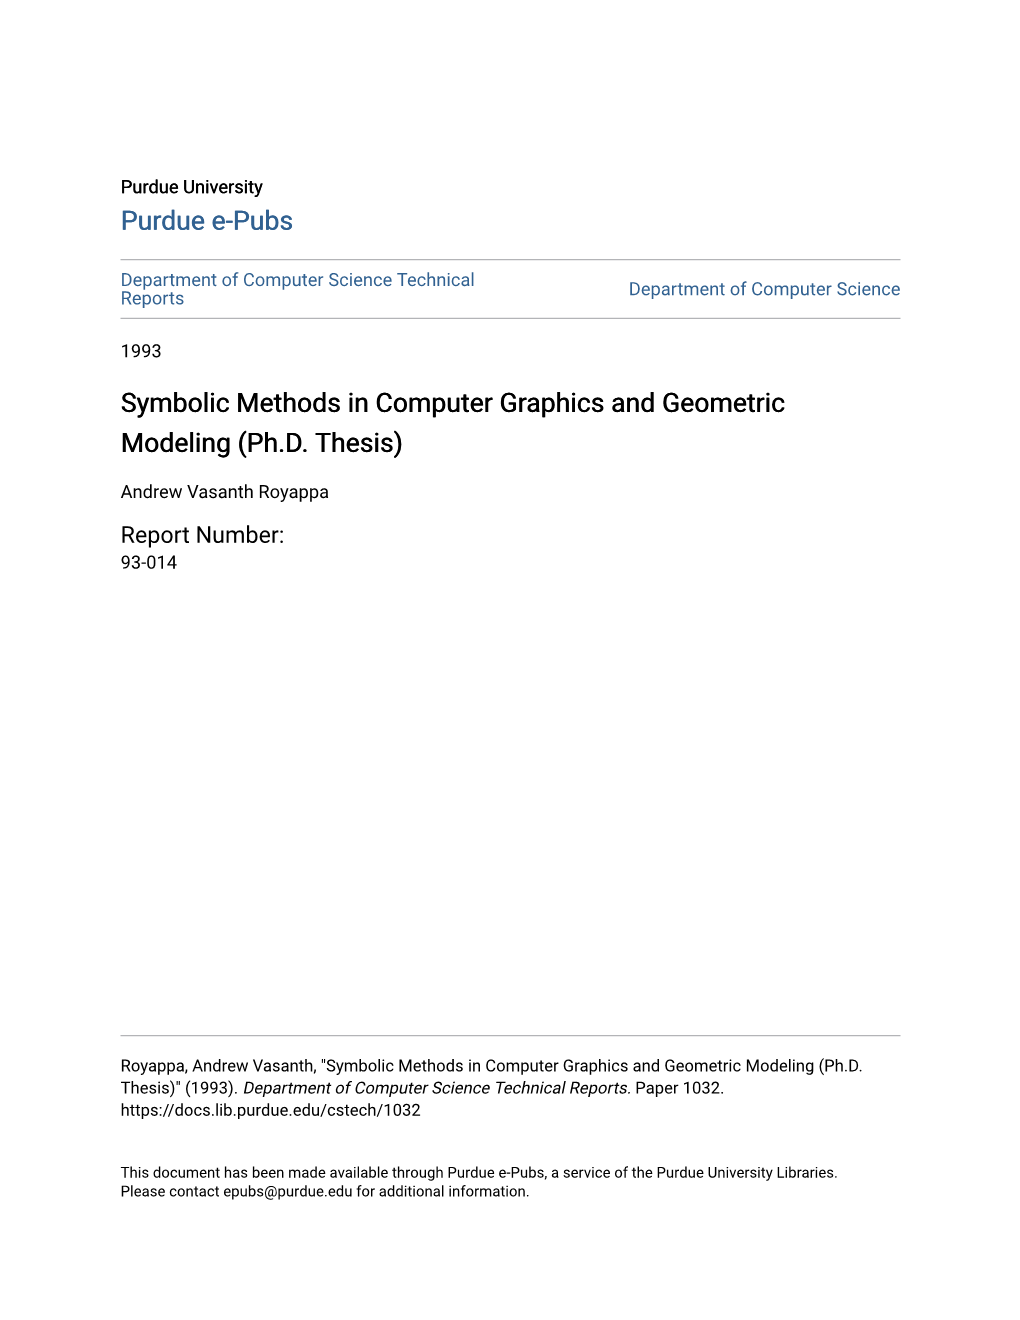 Symbolic Methods in Computer Graphics and Geometric Modeling (Ph.D